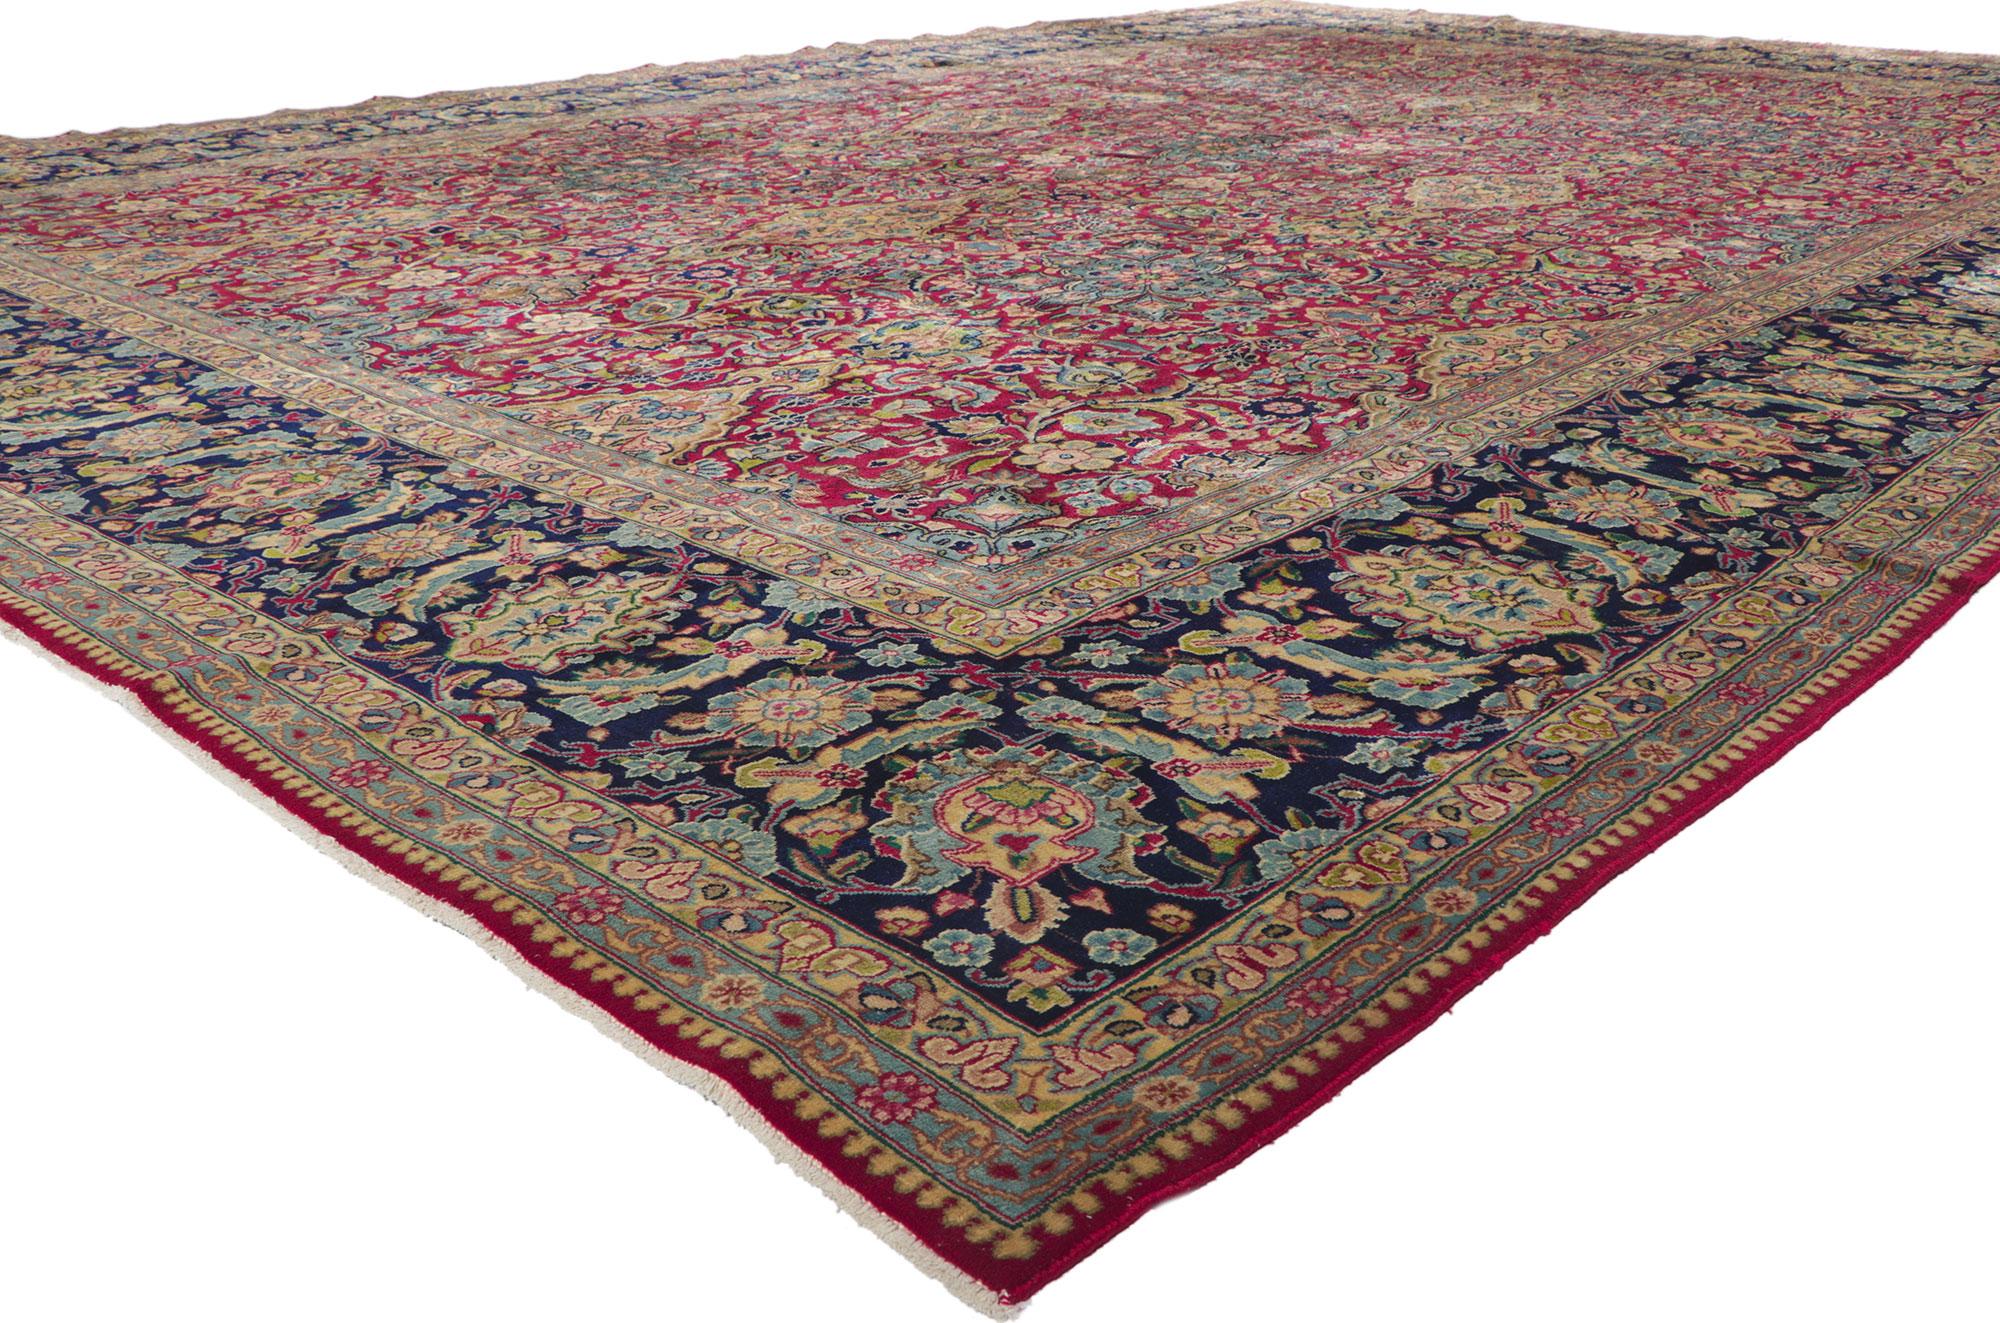 61193 Vintage Persian Kerman rug, 11'06 x 16'03.? With its incredible detail and texture, this hand knotted wool Vintage Persian Kerman rug is a captivating vision of woven beauty. The timeless botanical design and refined color palette woven into